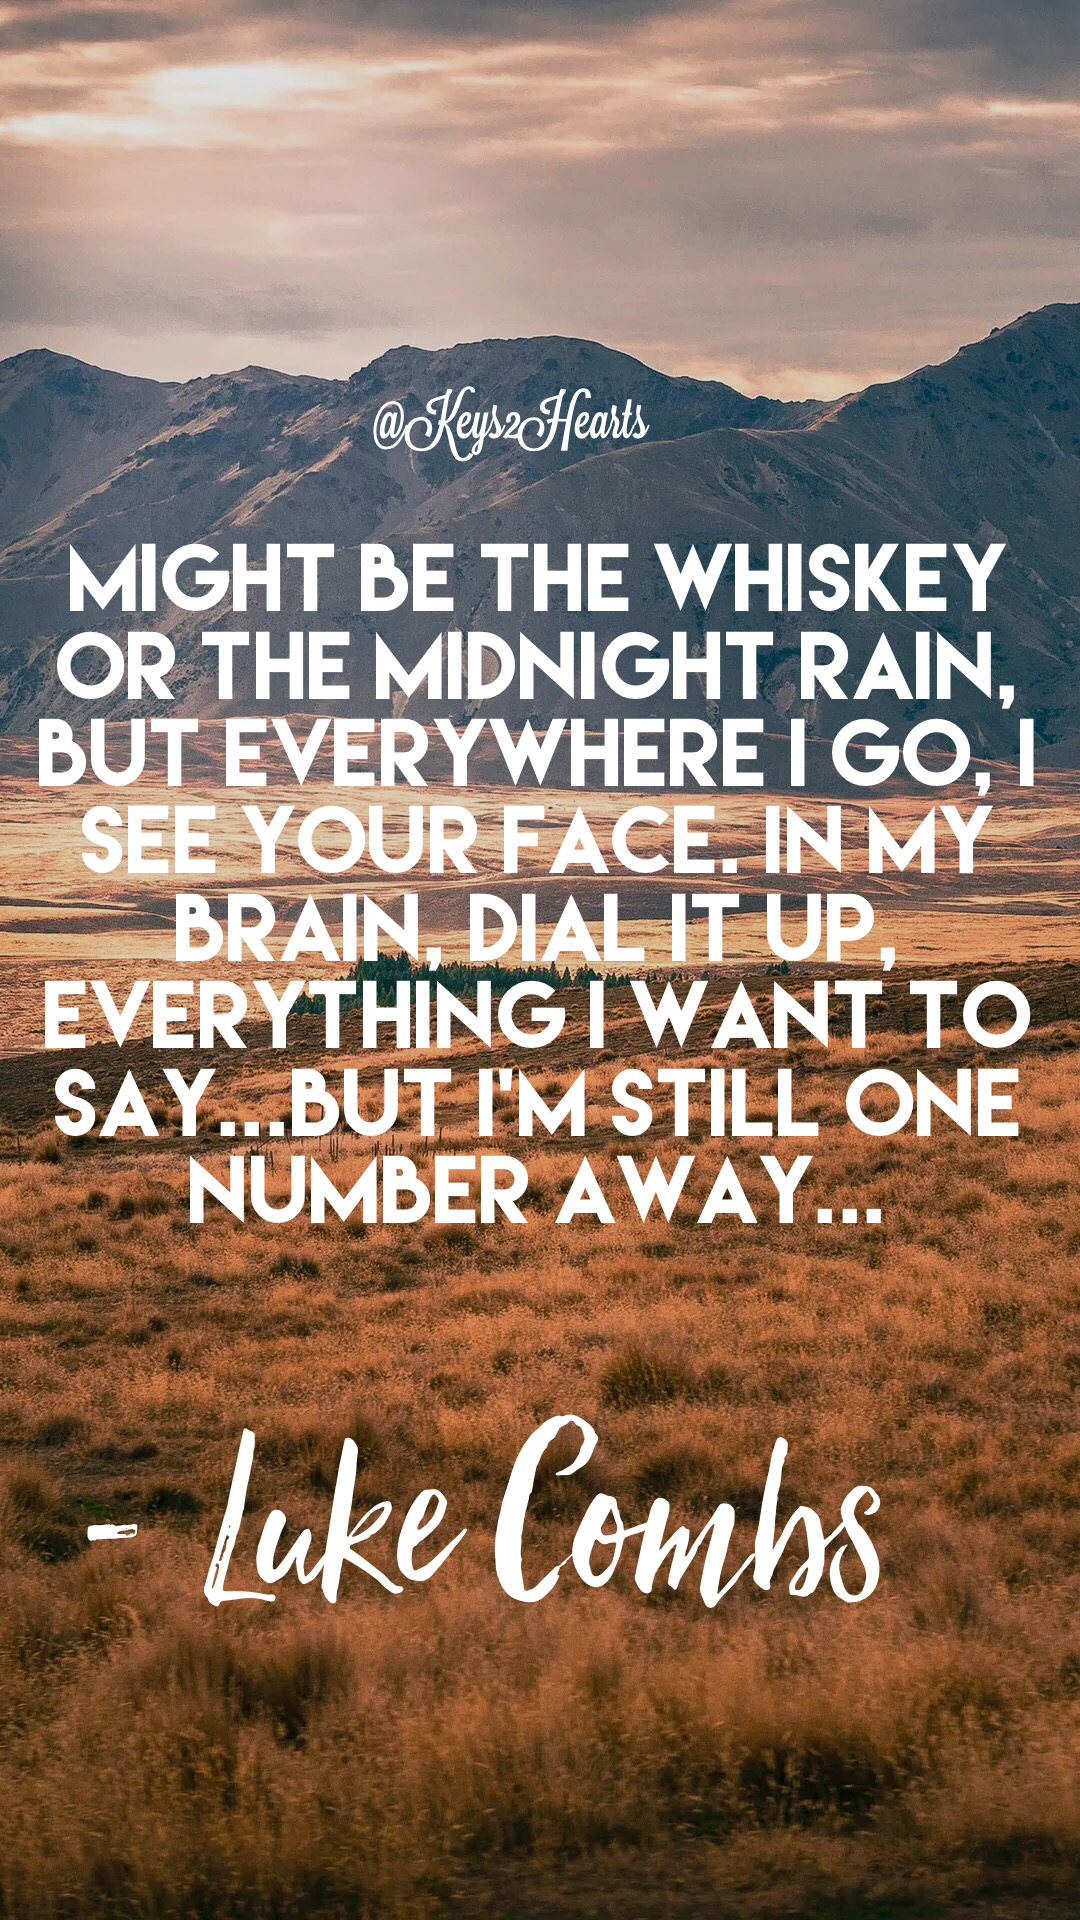 One Number Away by Luke Combs. Created by Jaison Keyette (Keys2Hearts). Country music lyrics quotes, Country love songs, Country lyrics quotes